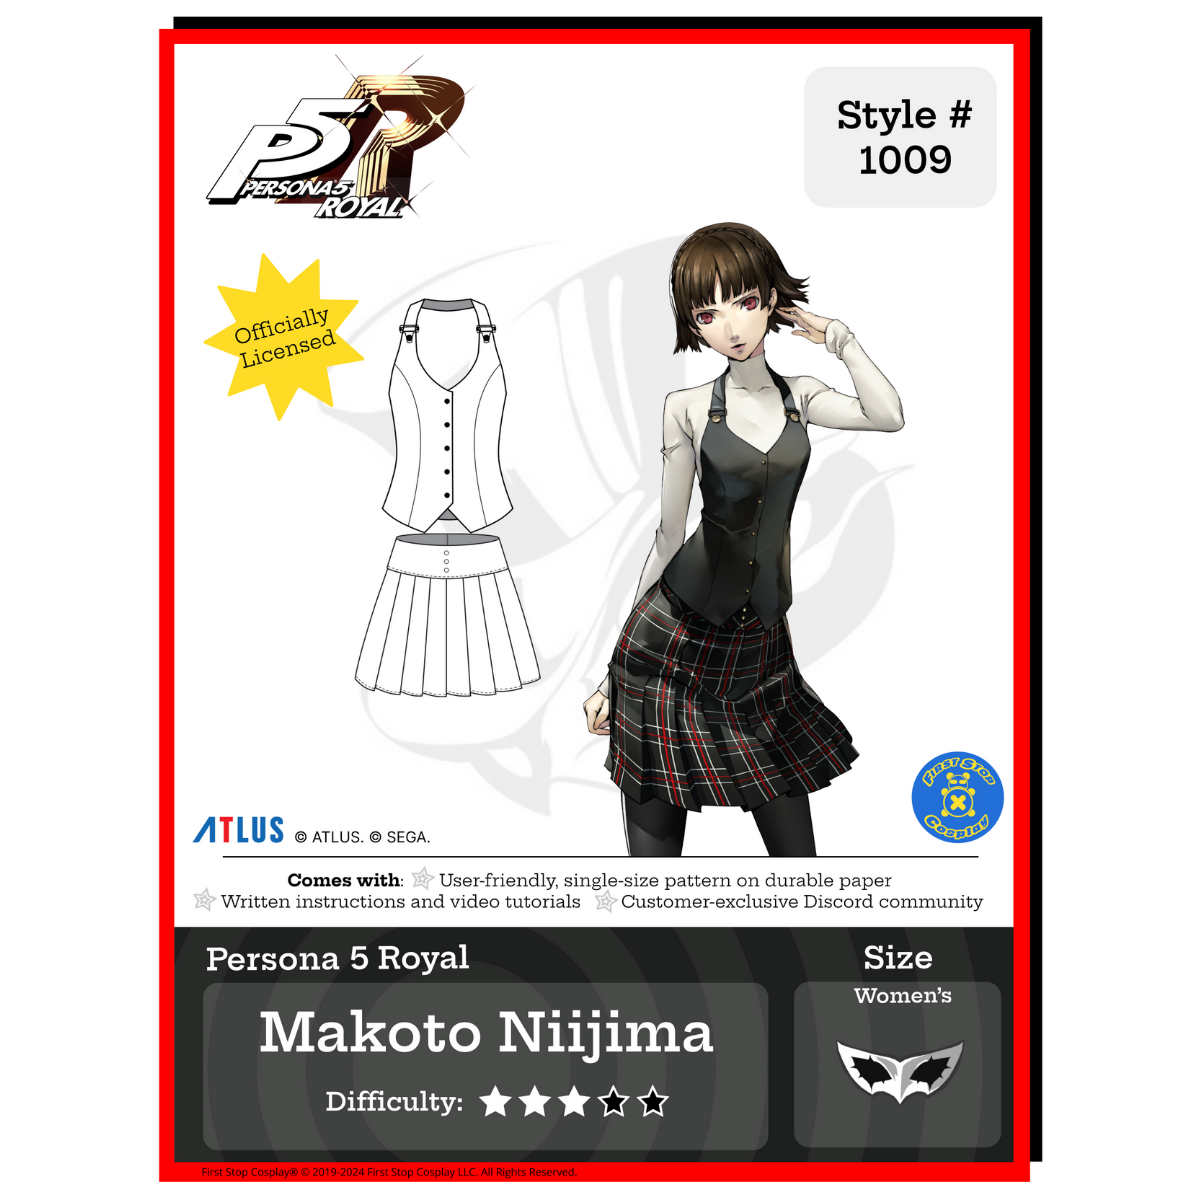 A graphic of the front packaging for Style #1009- Makoto Niijima. The Persona 5 Royal logo is in the top left corner. Below the logo is an "officially licensed" stamp. Below the stamp is the line art of the completed pattern. To the right is an image of Persona 5 Royal's character, Makoto, wearing her Shujin school uniform outfit. To the right of Makoto, in the corner, is the First Stop Cosplay circle logo. This pattern is 3 star in difficulty rating and follows our women's size chart.